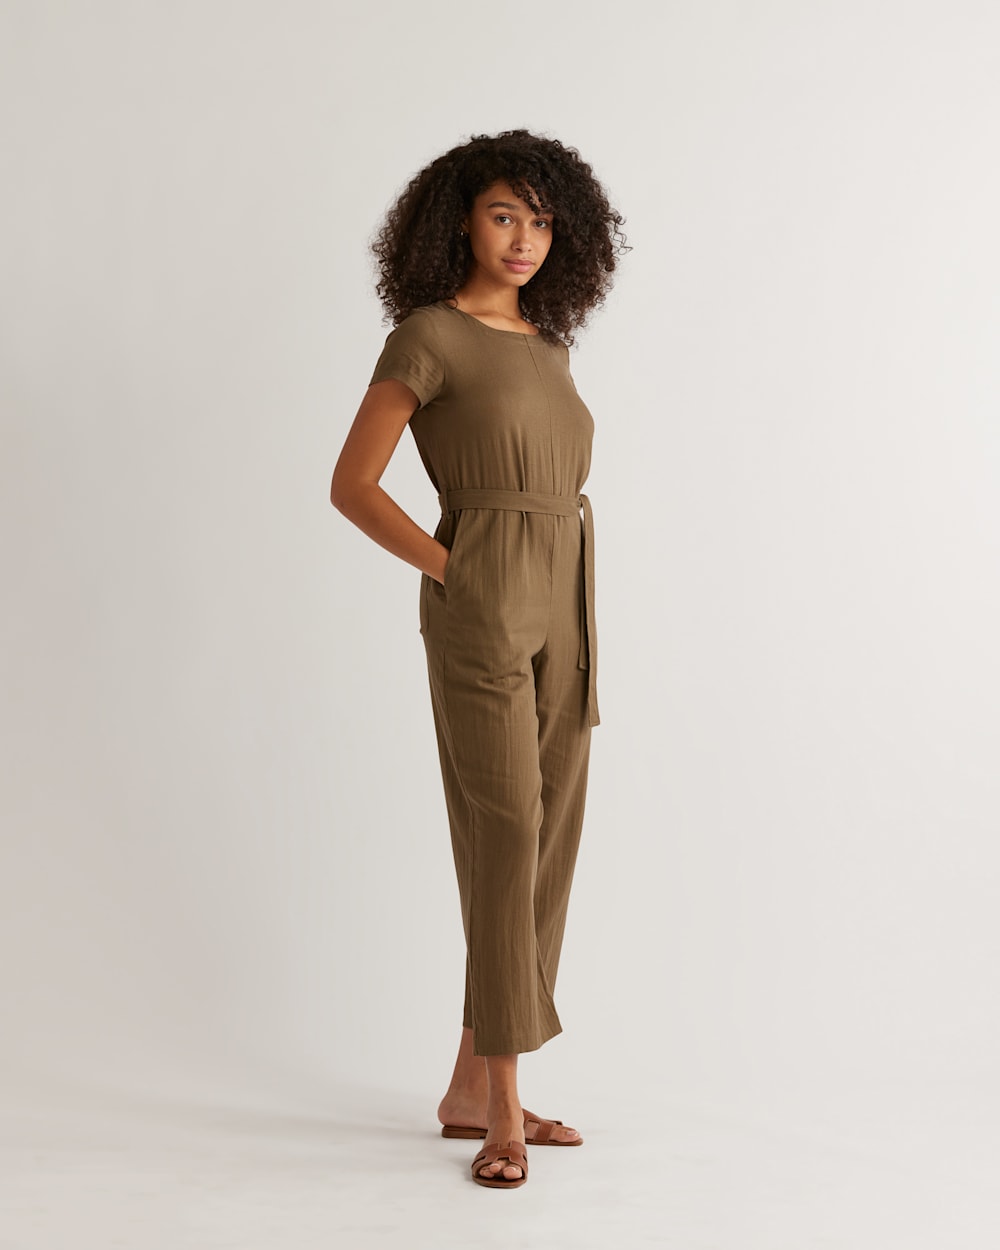 ALTERNATE VIEW OF WOMEN'S LILA LINEN-BLEND JUMPSUIT IN DRIED BASIL image number 2